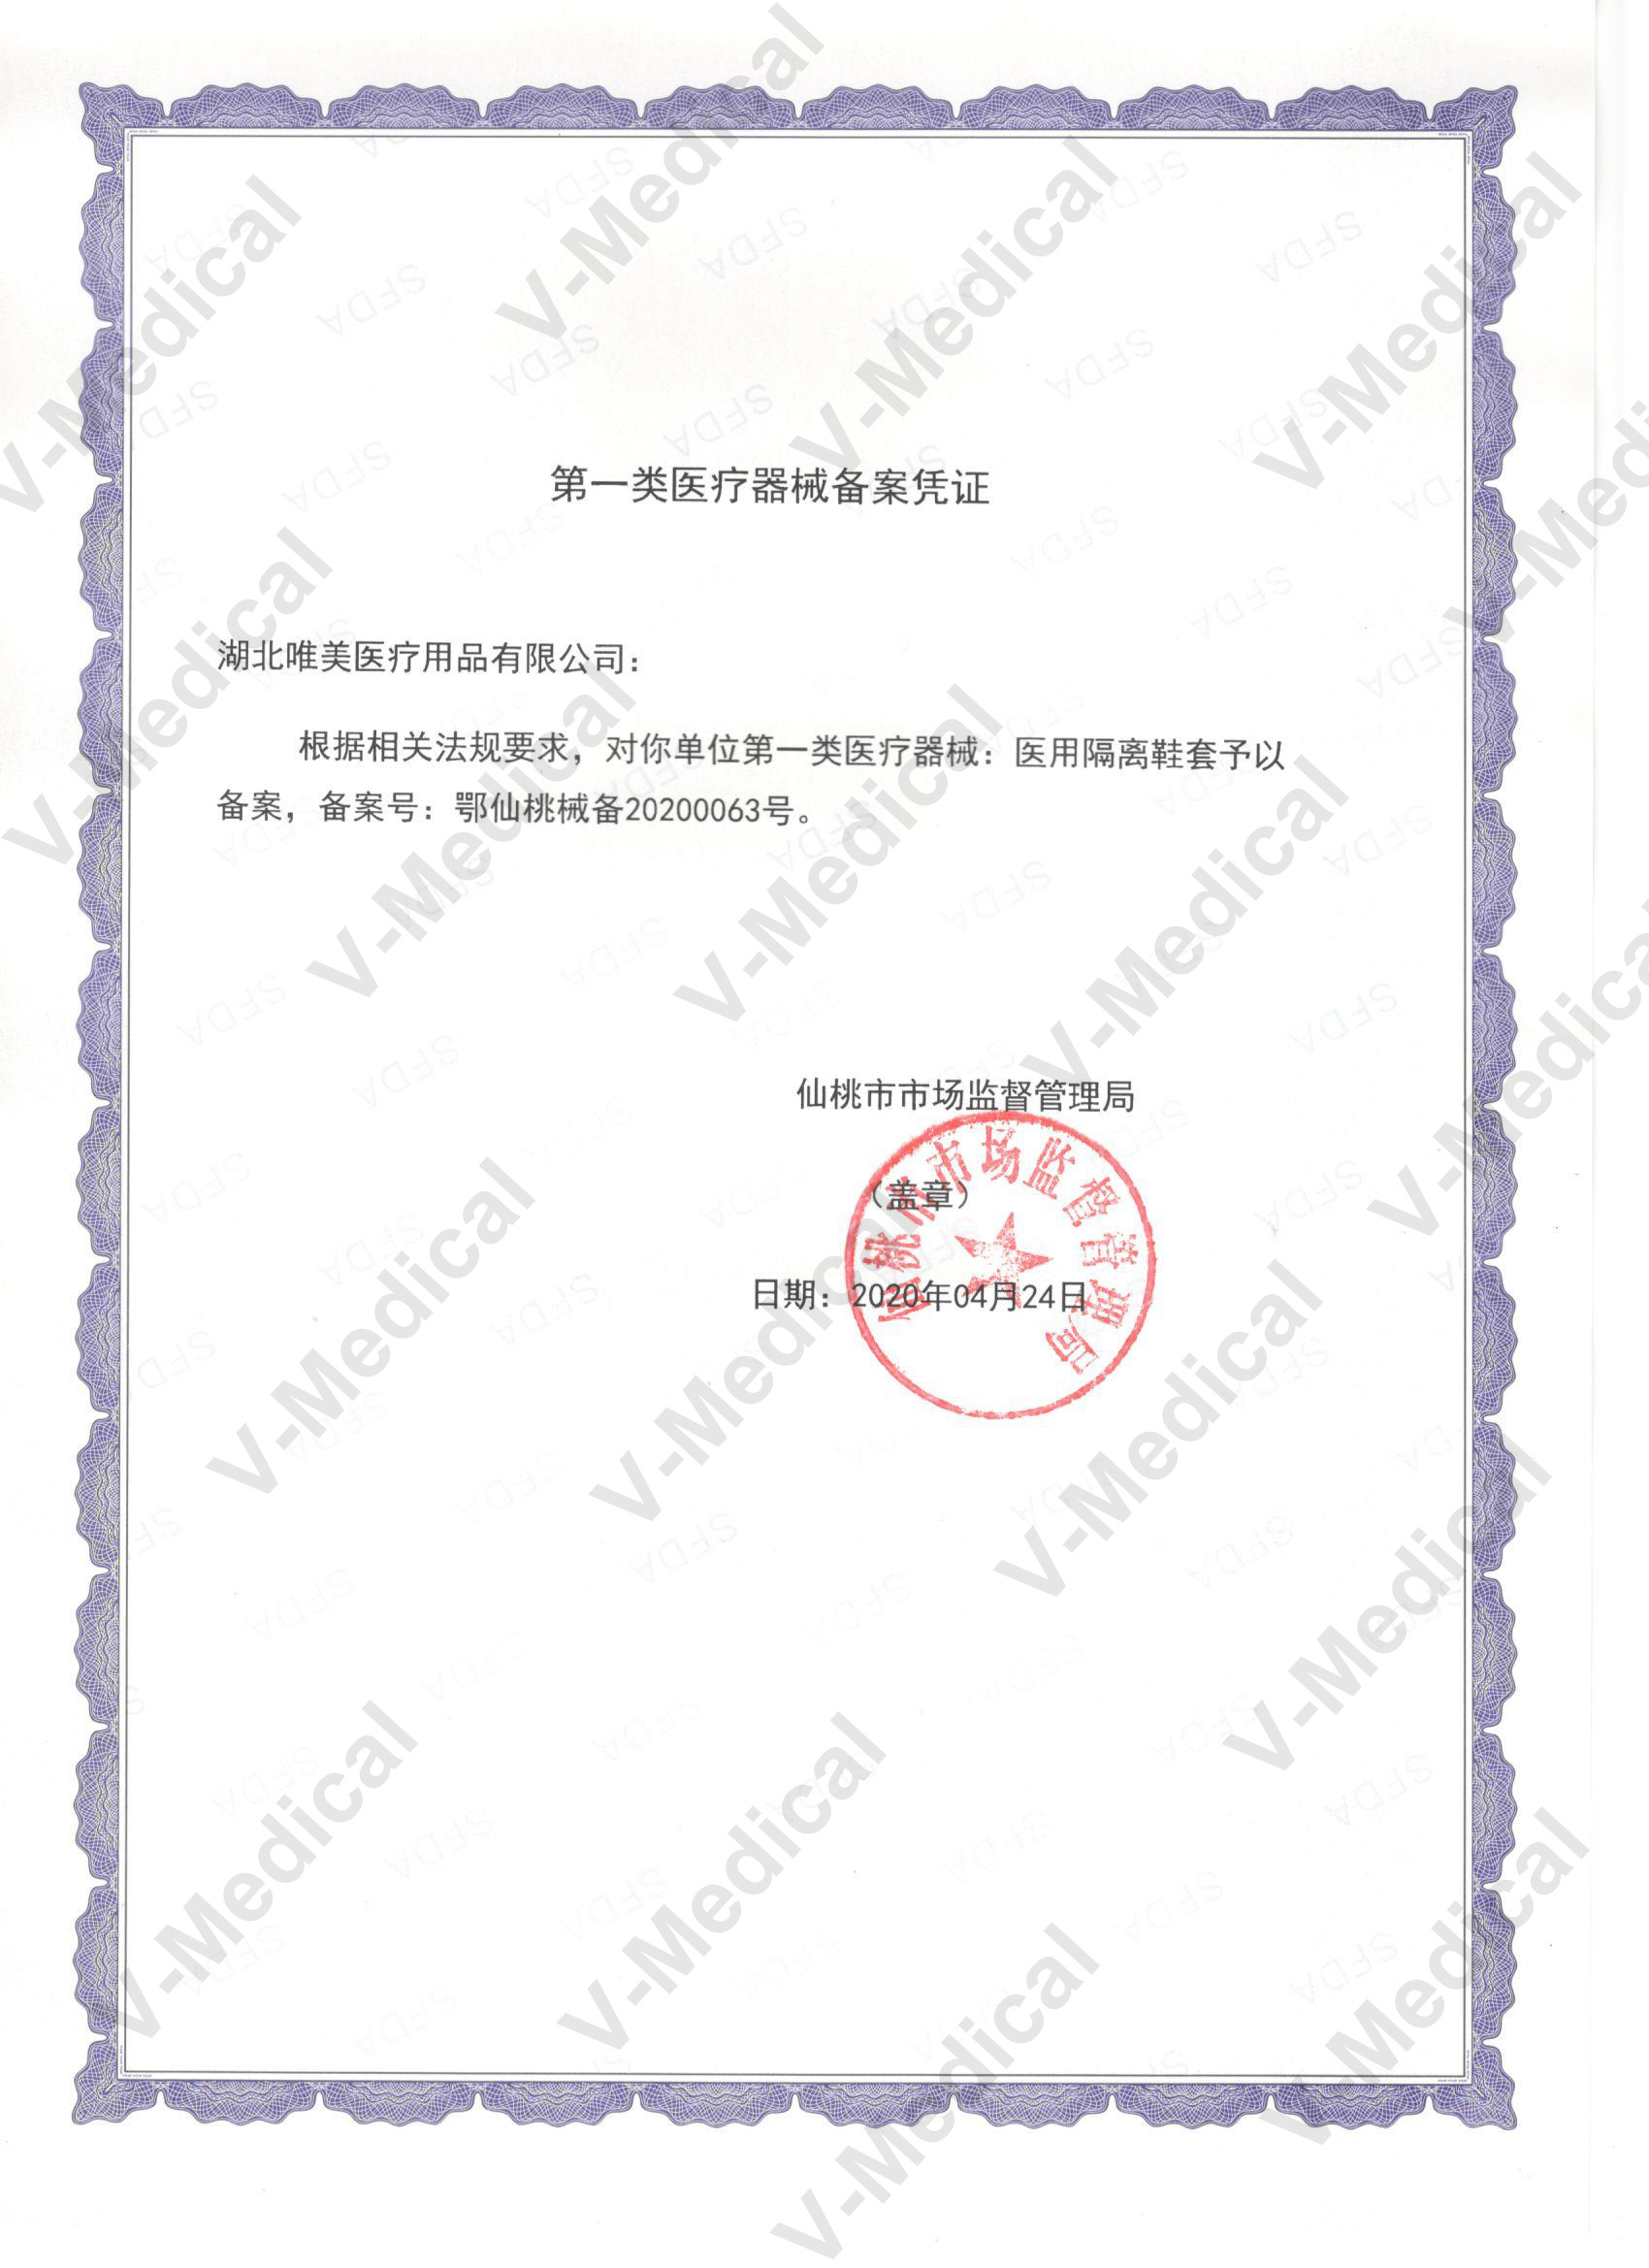 Record Lease Certificate for Medical Isolation Shoe Covers